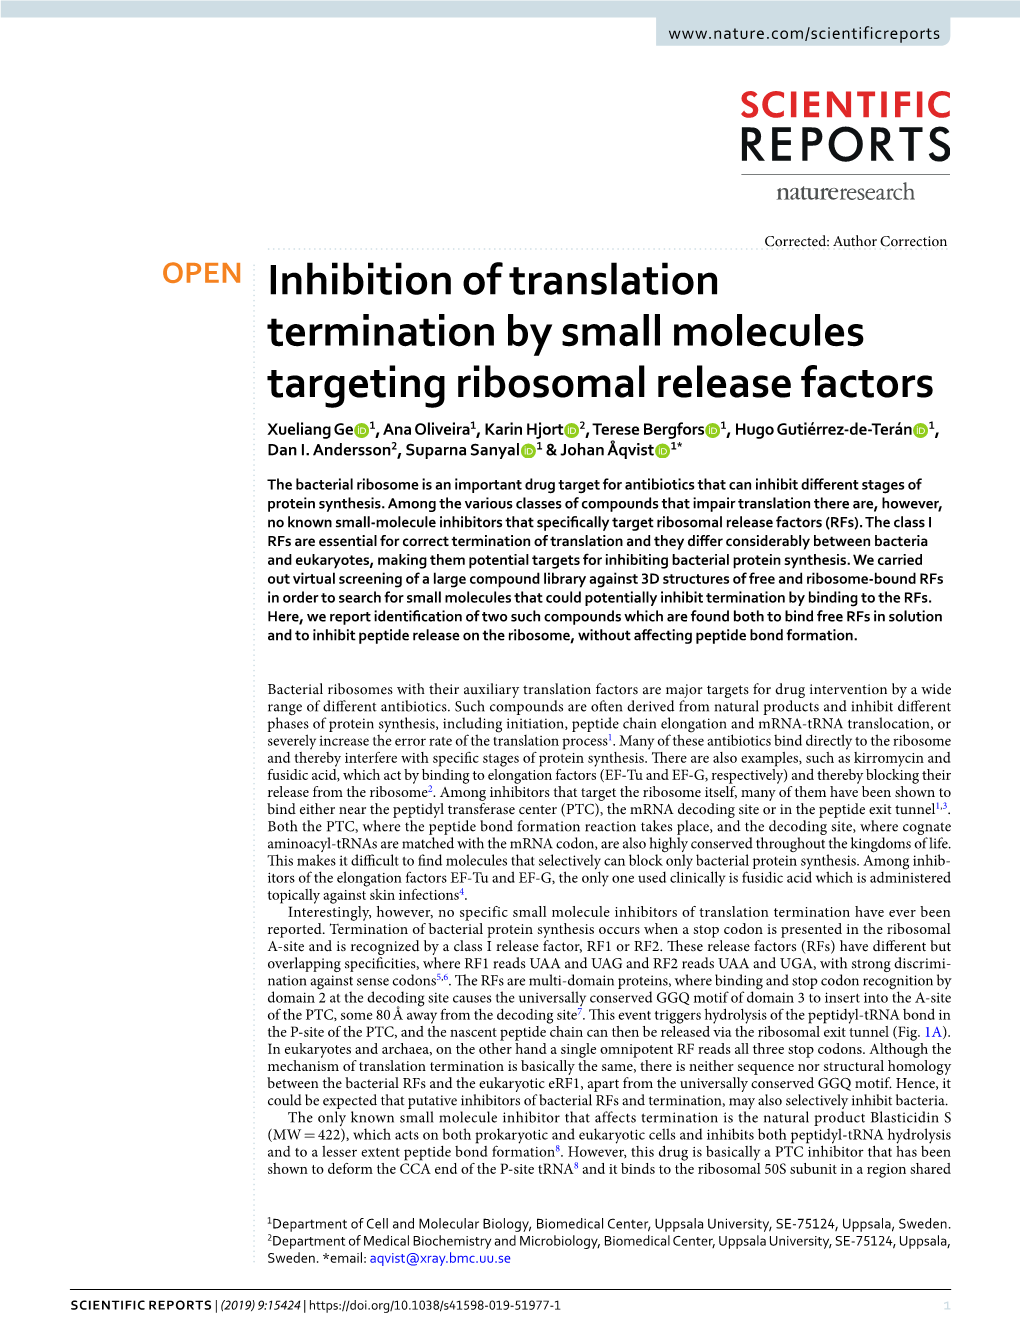 Inhibition of Translation Termination by Small Molecules Targeting